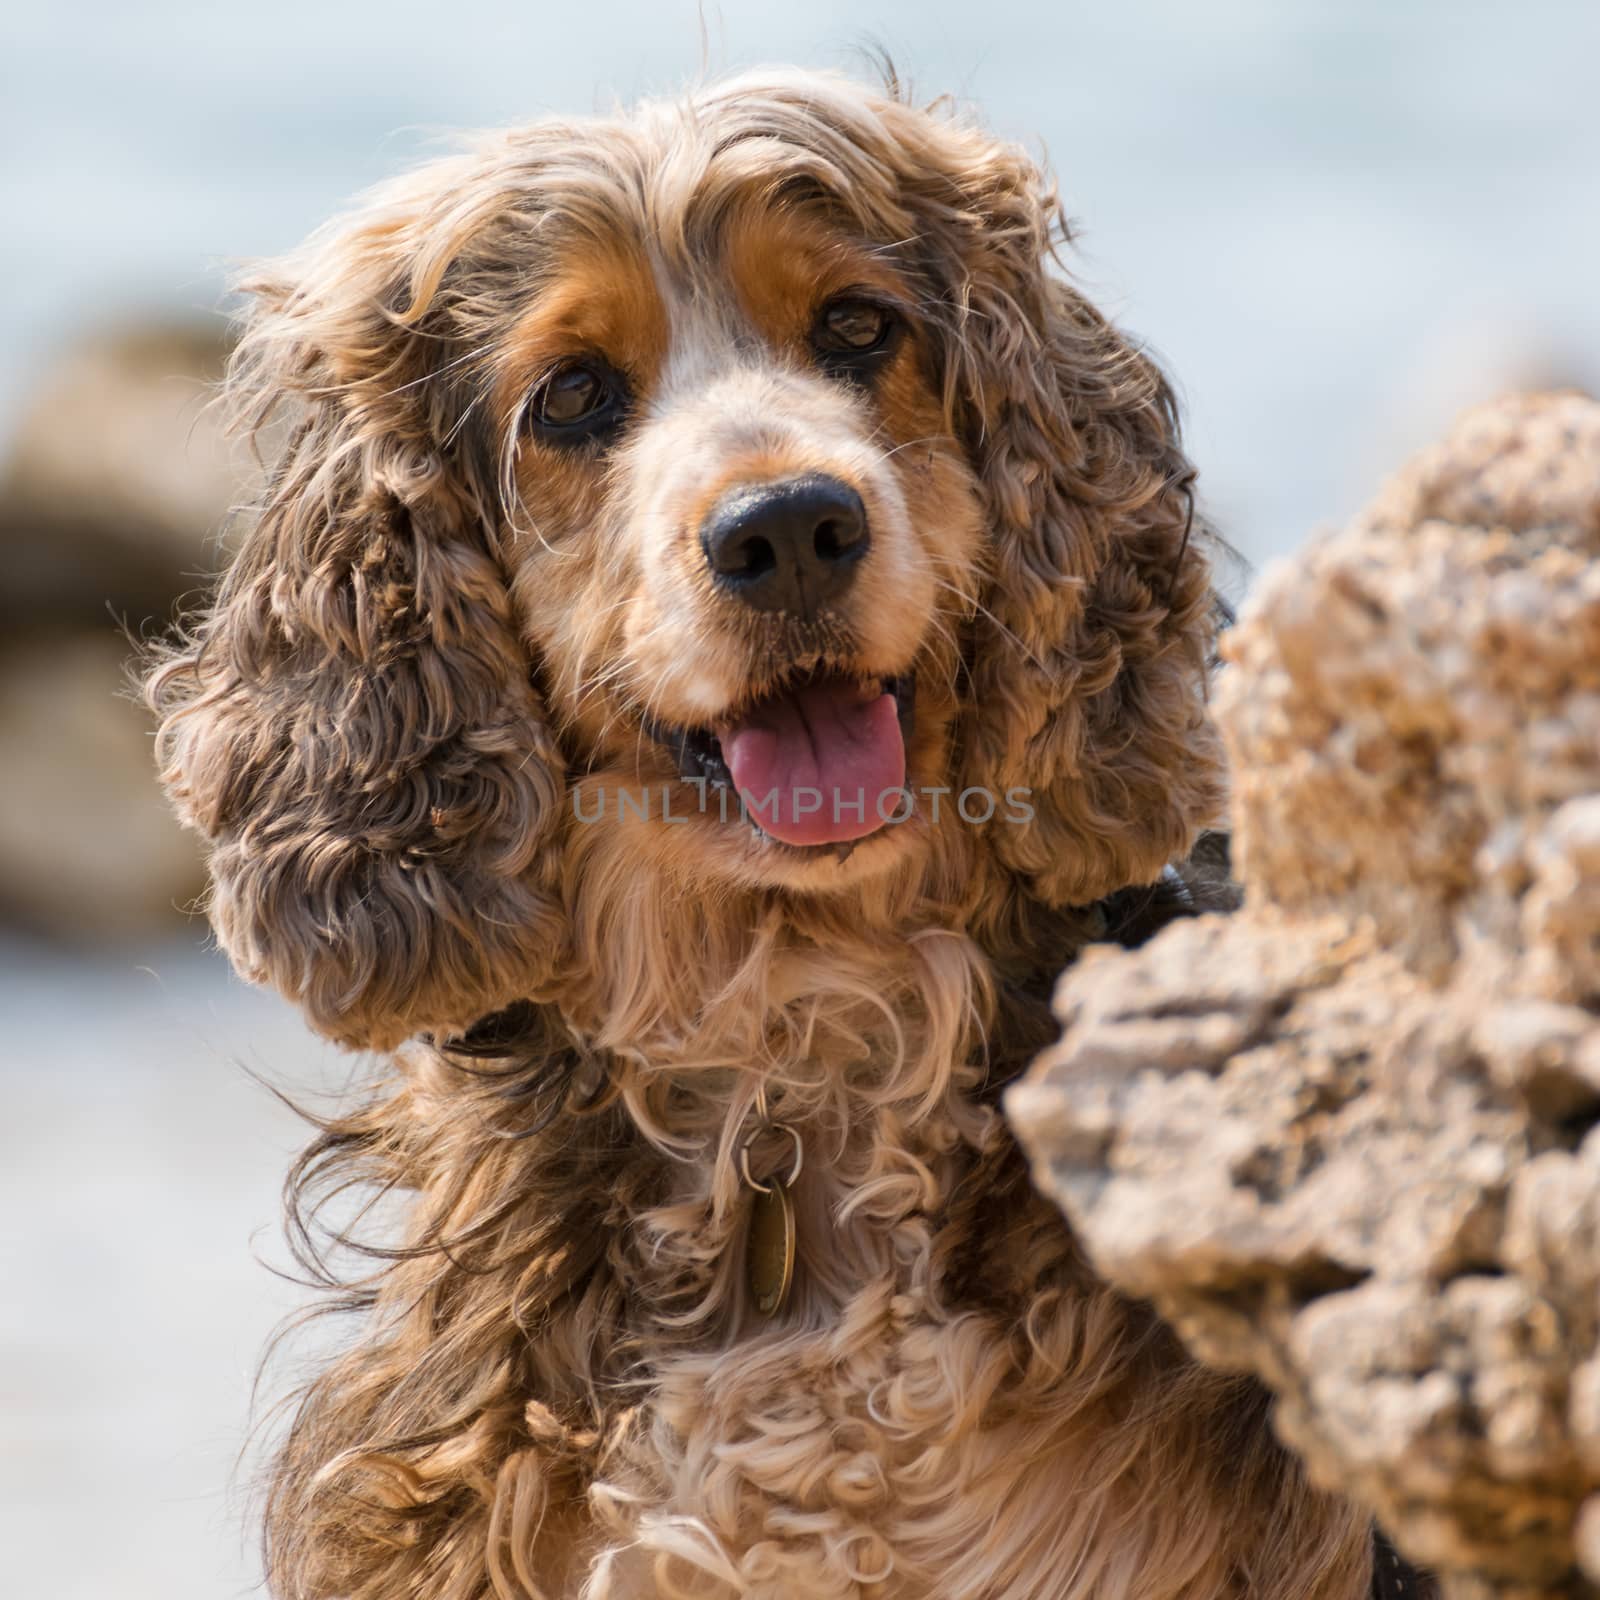 Brown little dog shows tongue behind a rock.